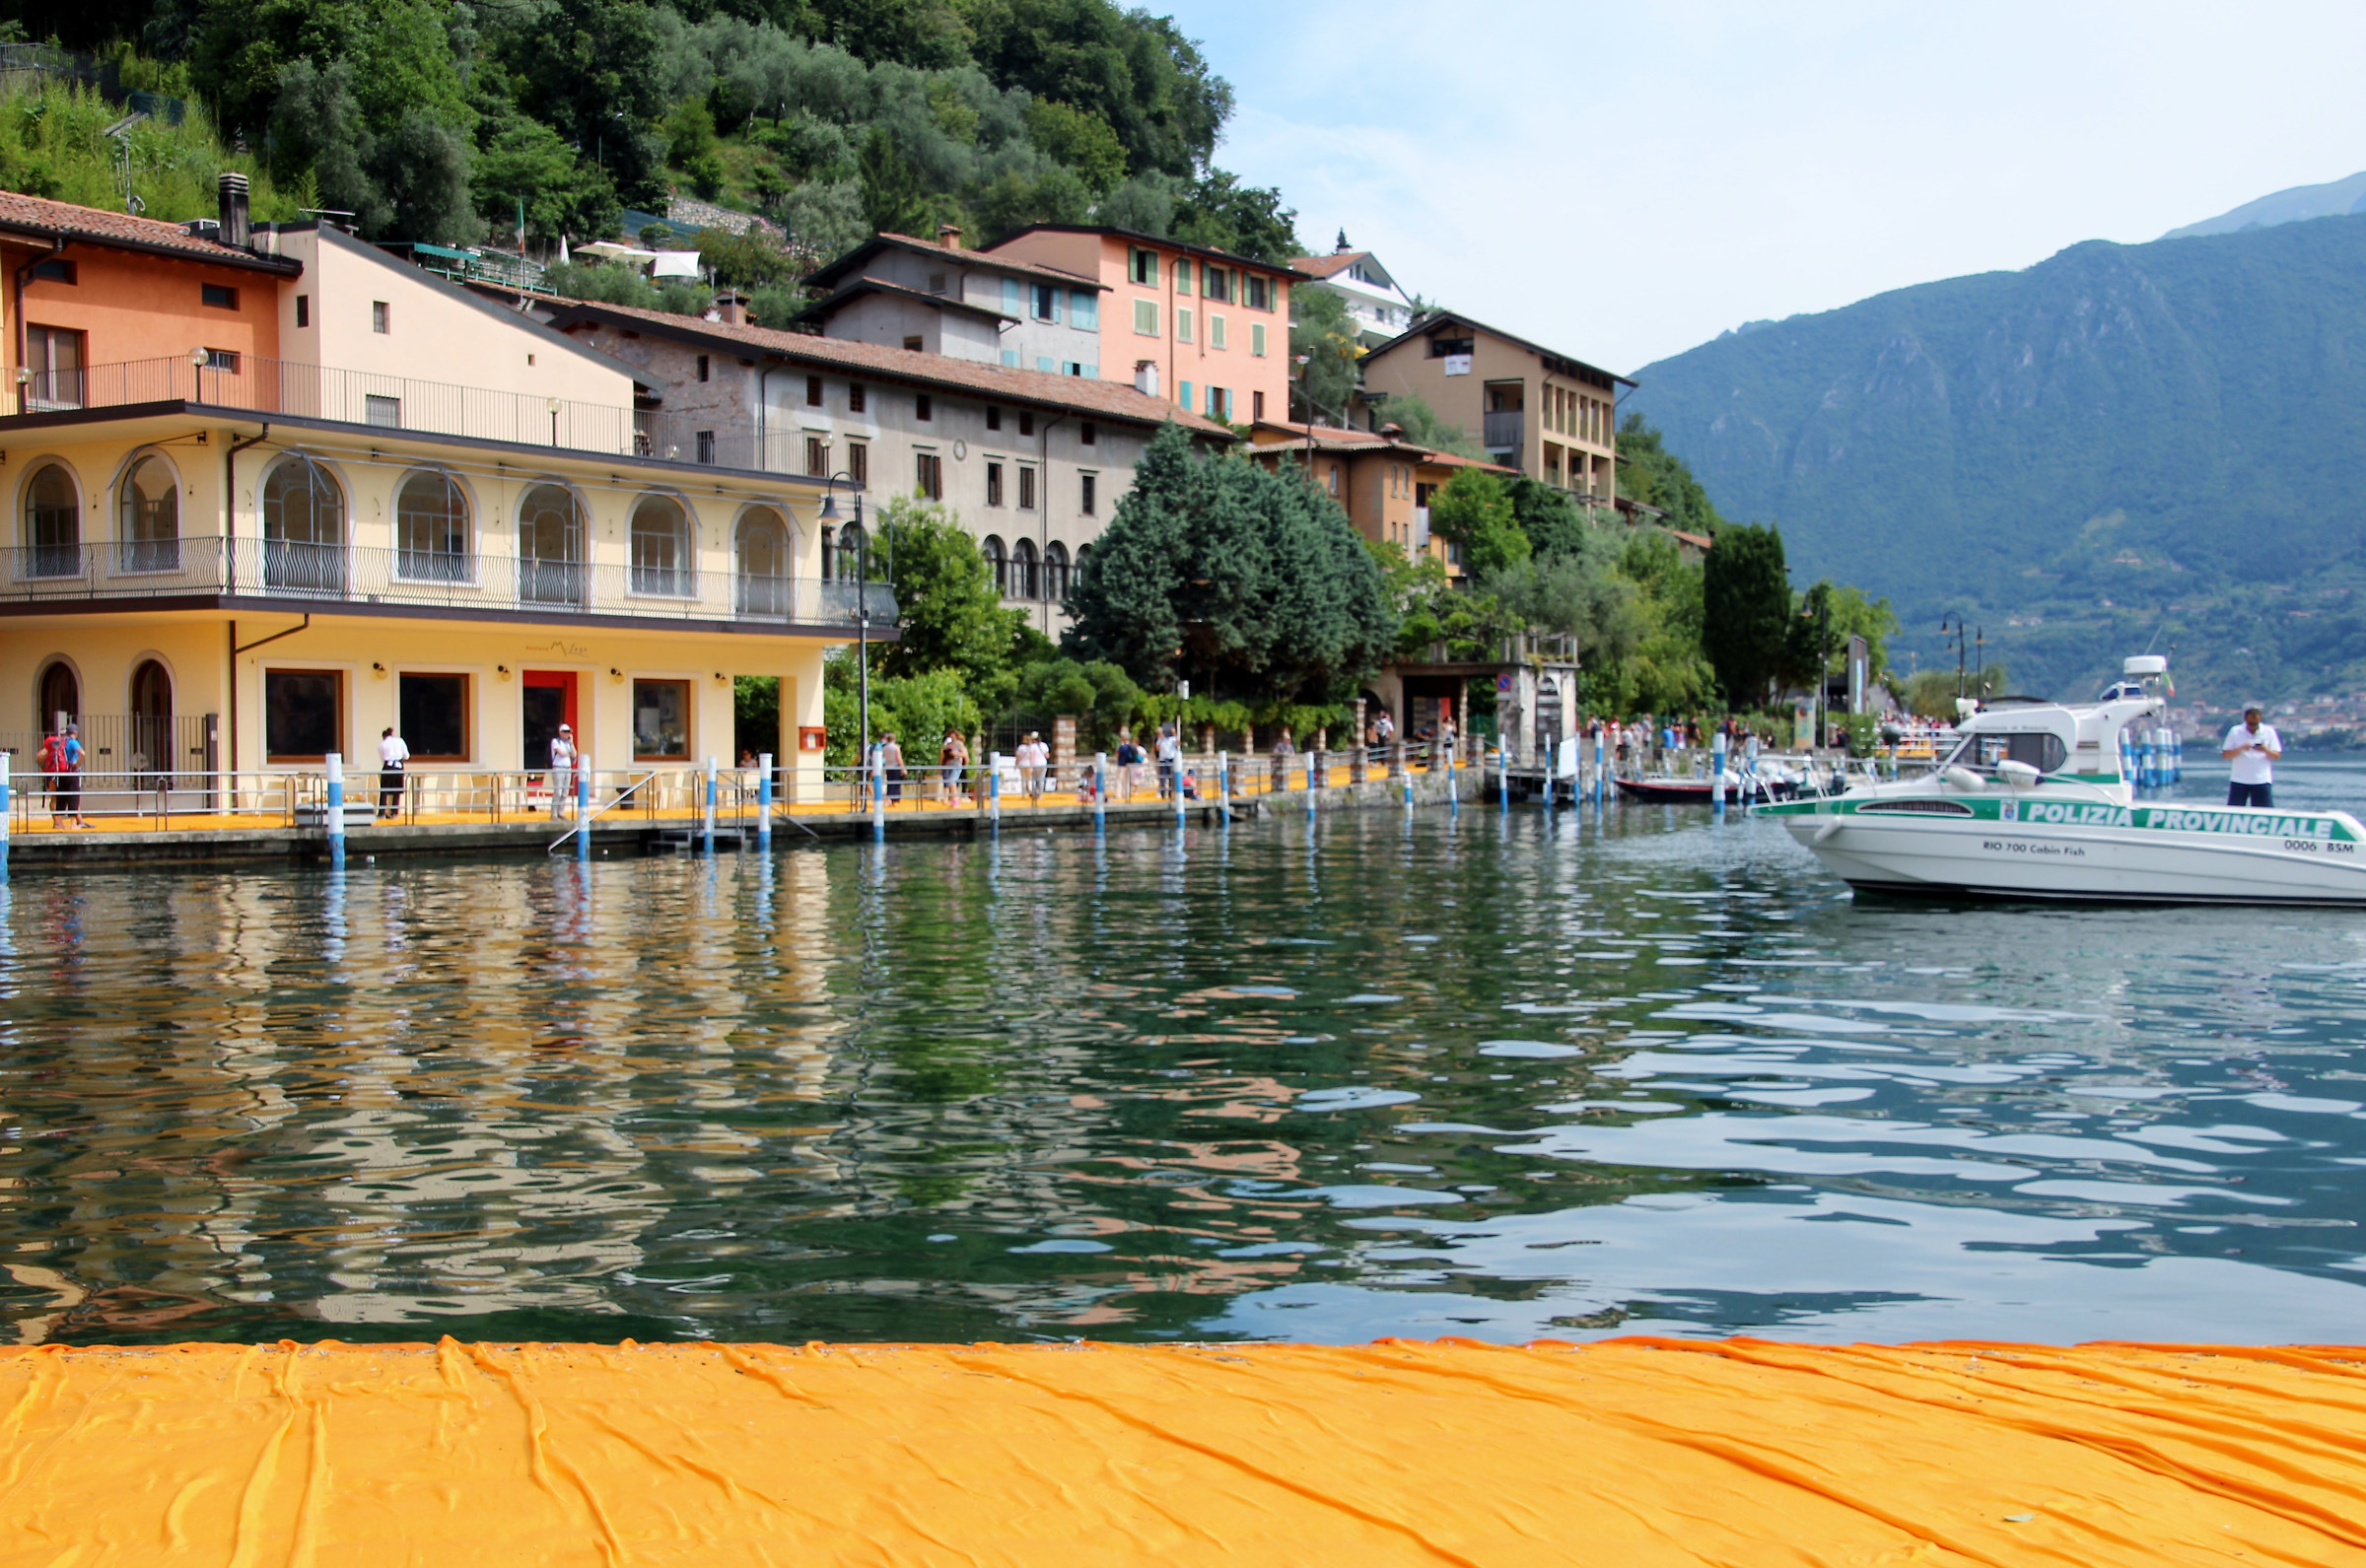 The Floating Piers...